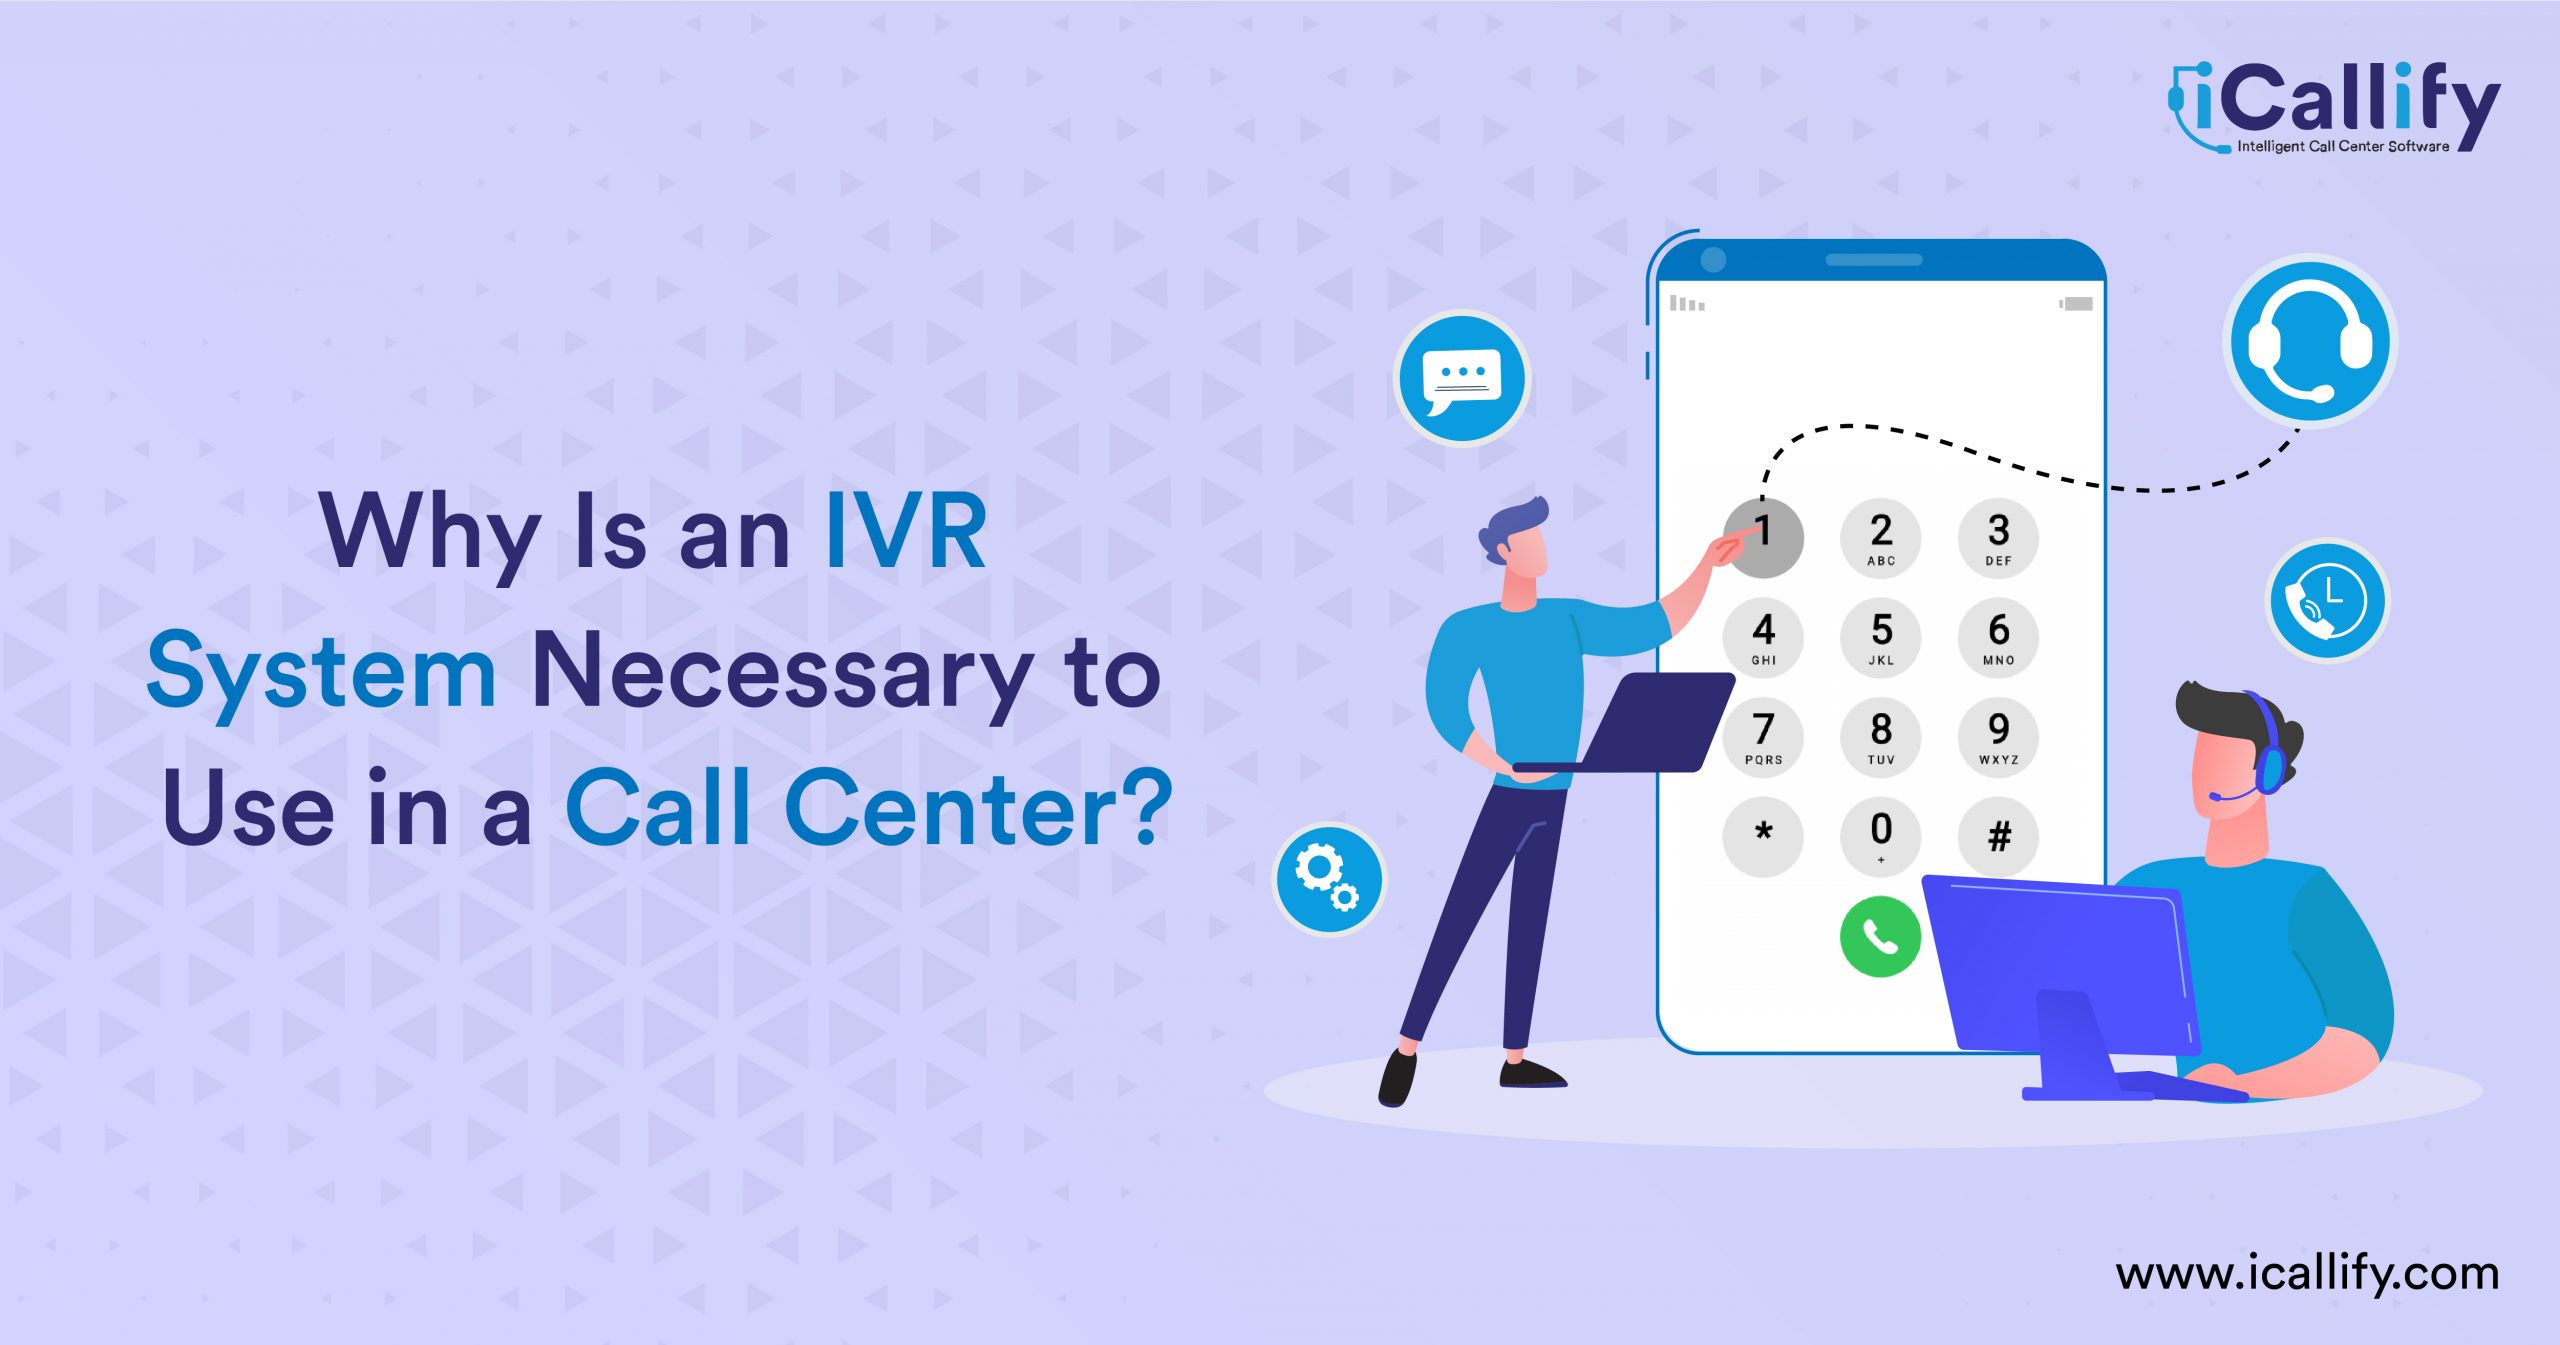 Why Is an IVR System Necessary to Use in a Call Center?